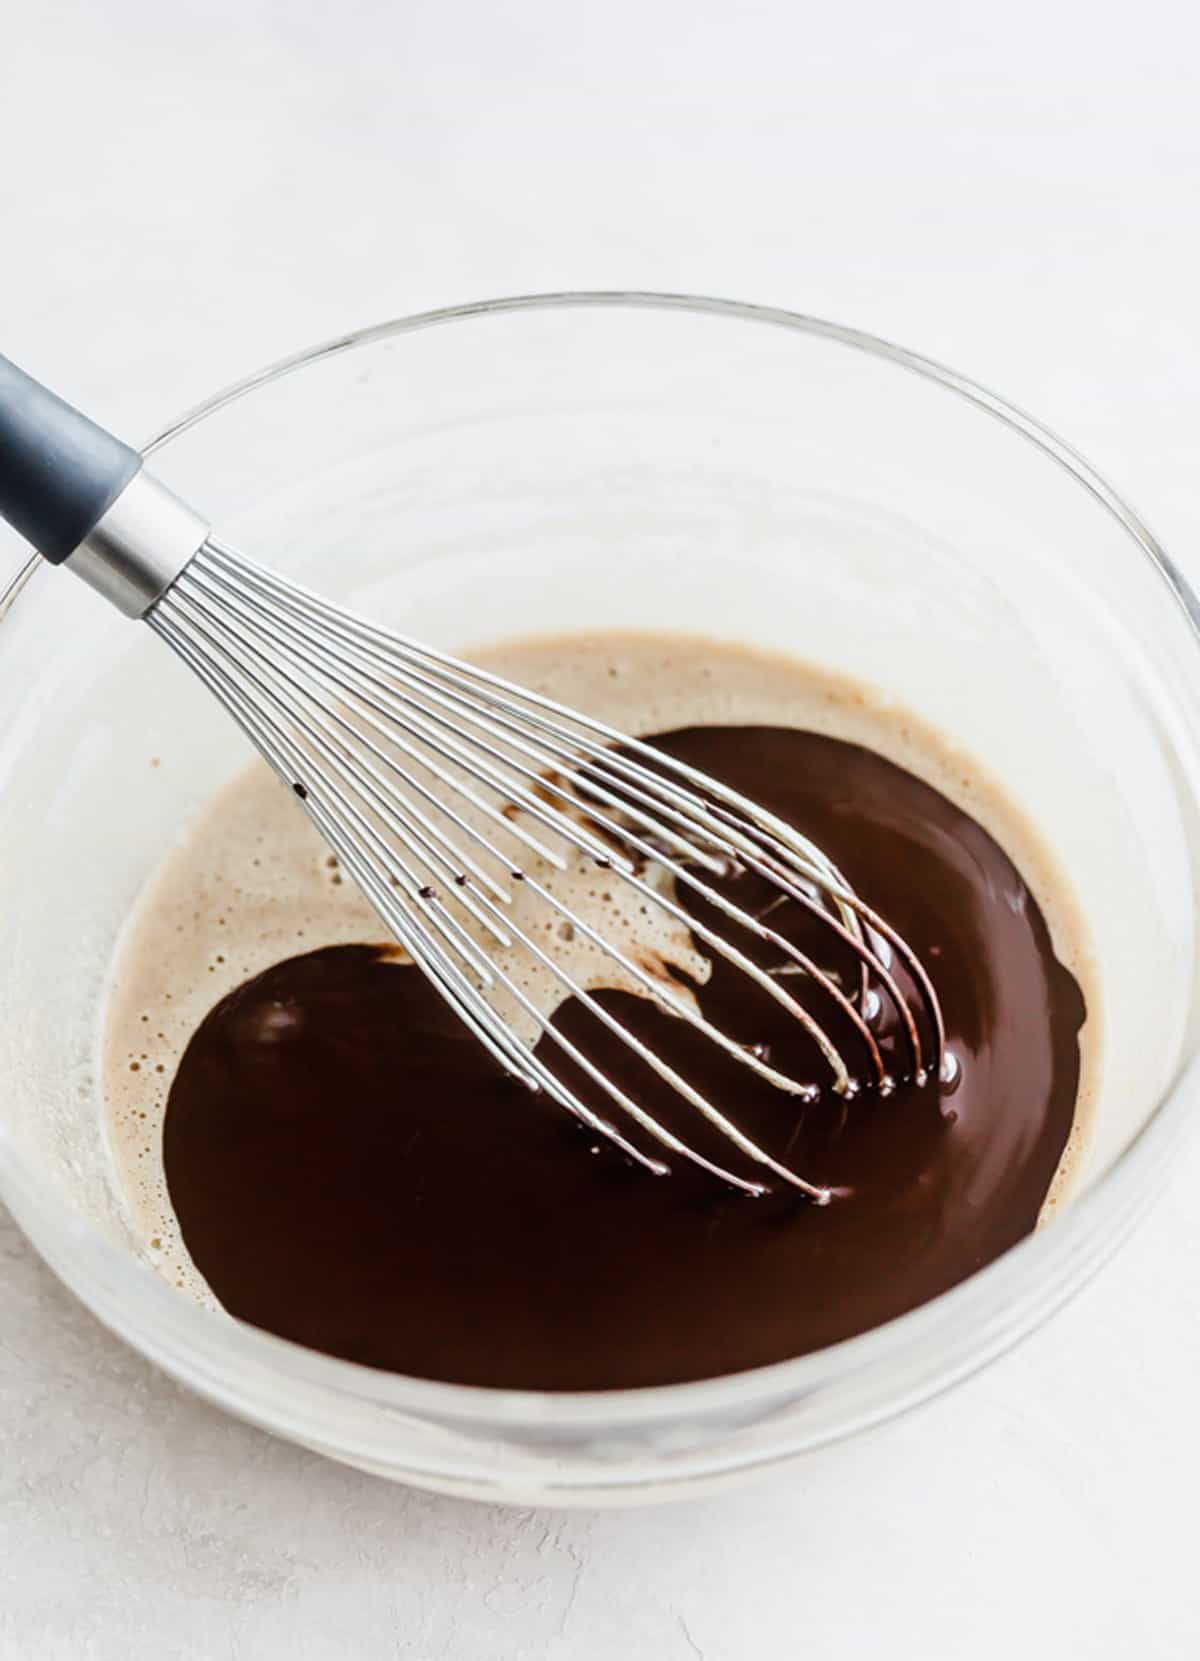 A whisk stirring butter and melted chocolate together.